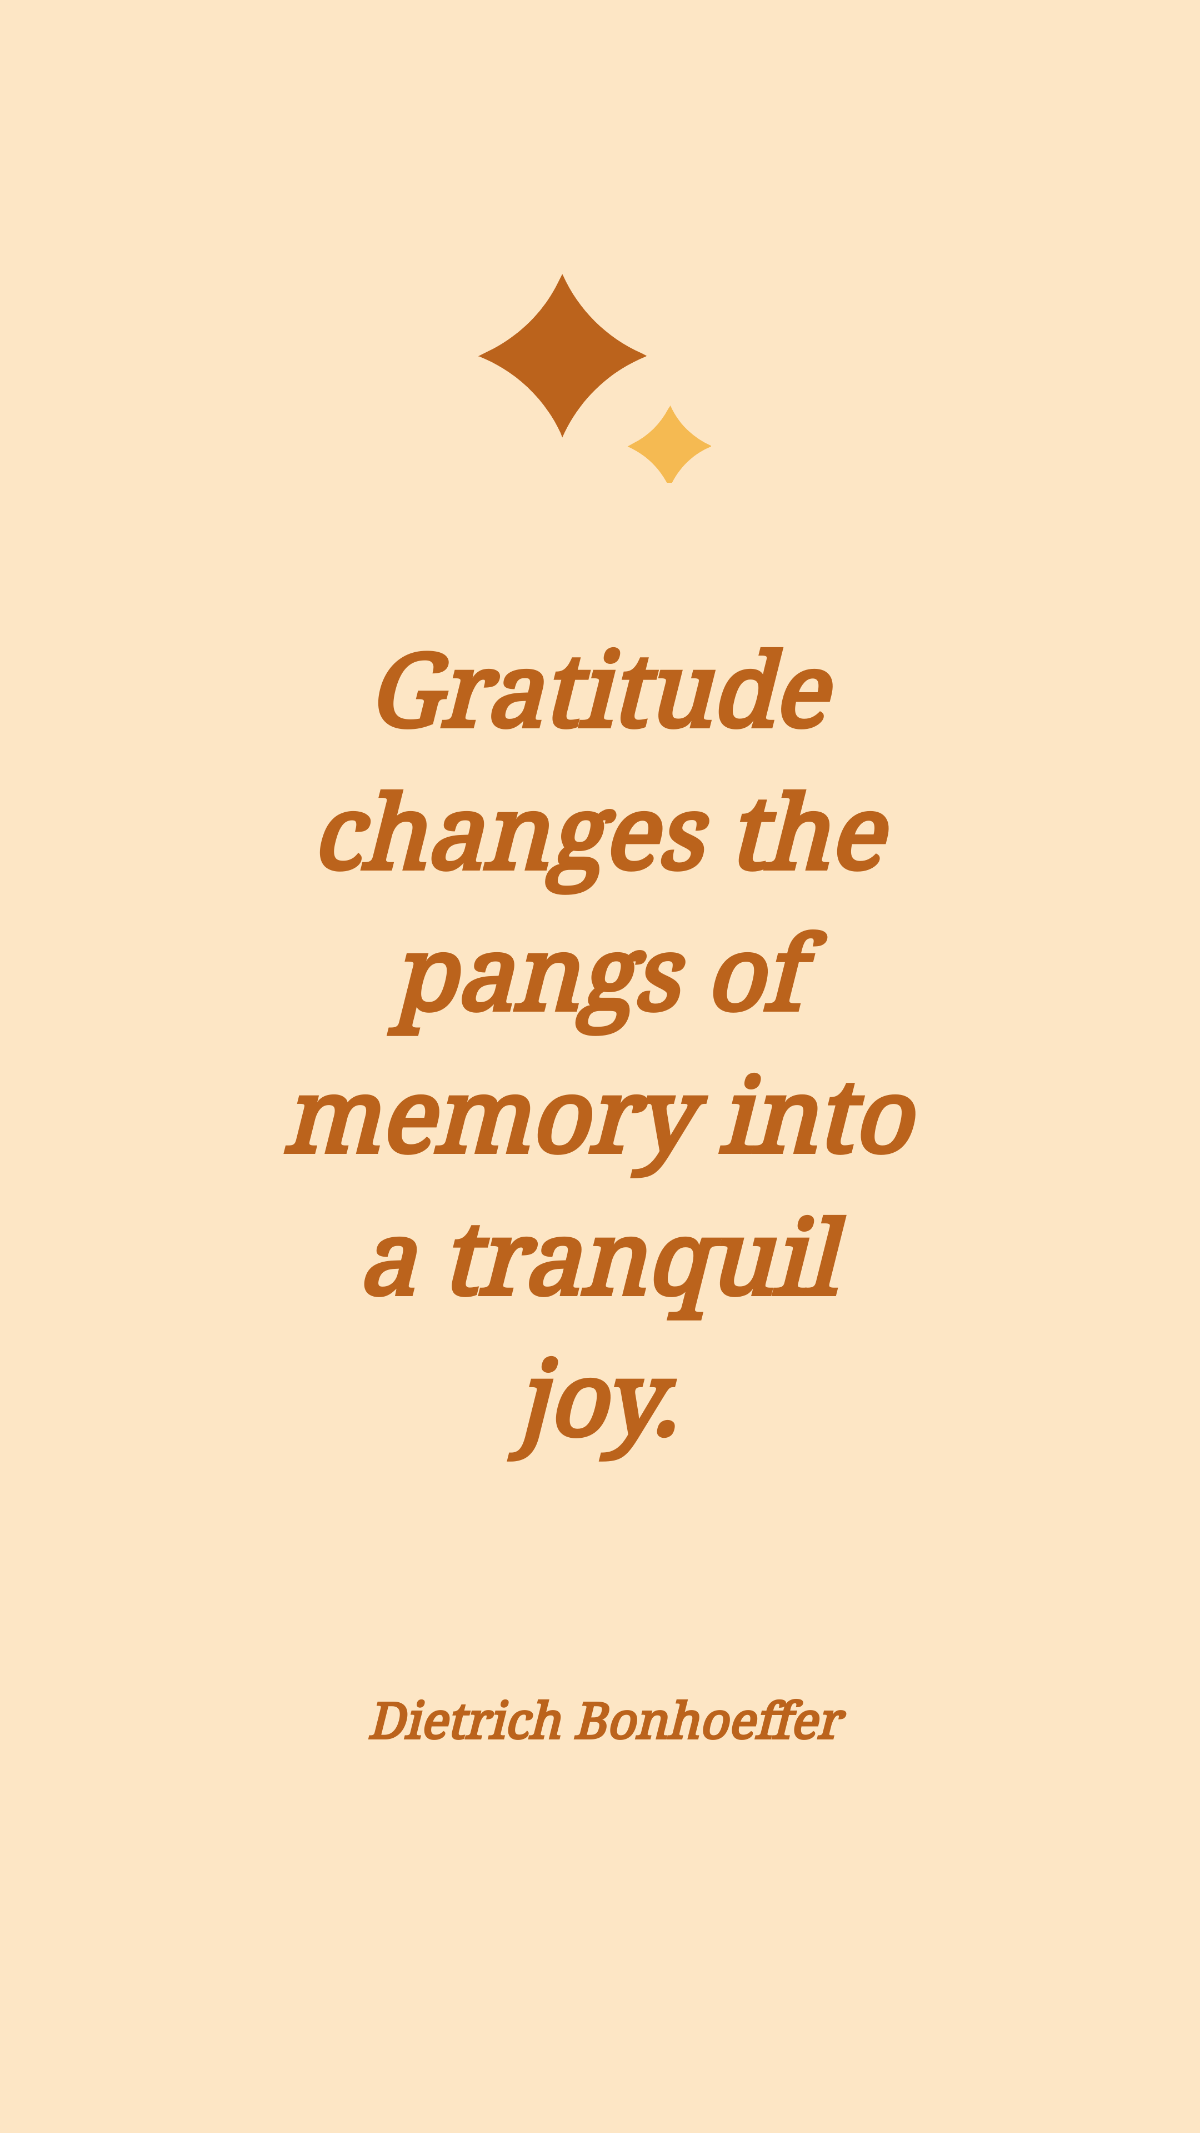 Dietrich Bonhoeffer - Gratitude changes the pangs of memory into a tranquil joy. Template